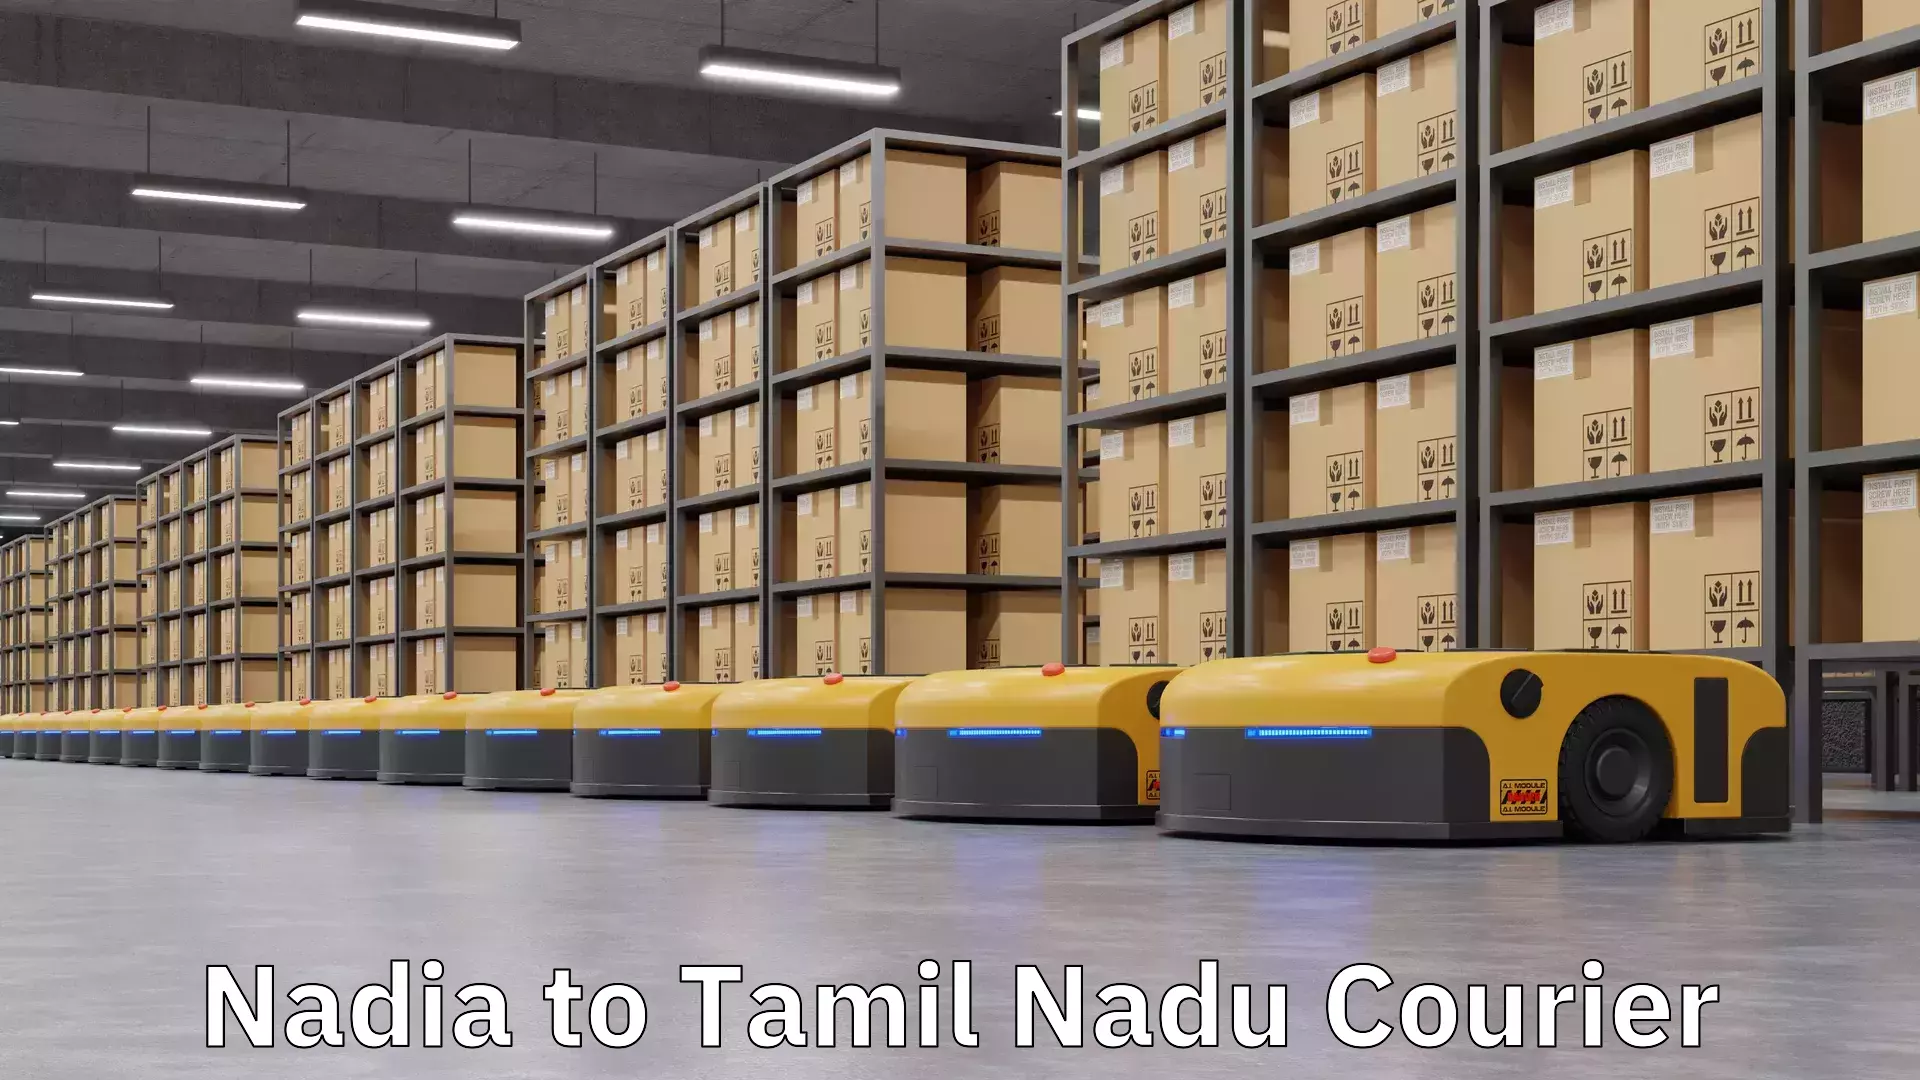 Next day courier in Nadia to Chennai Port